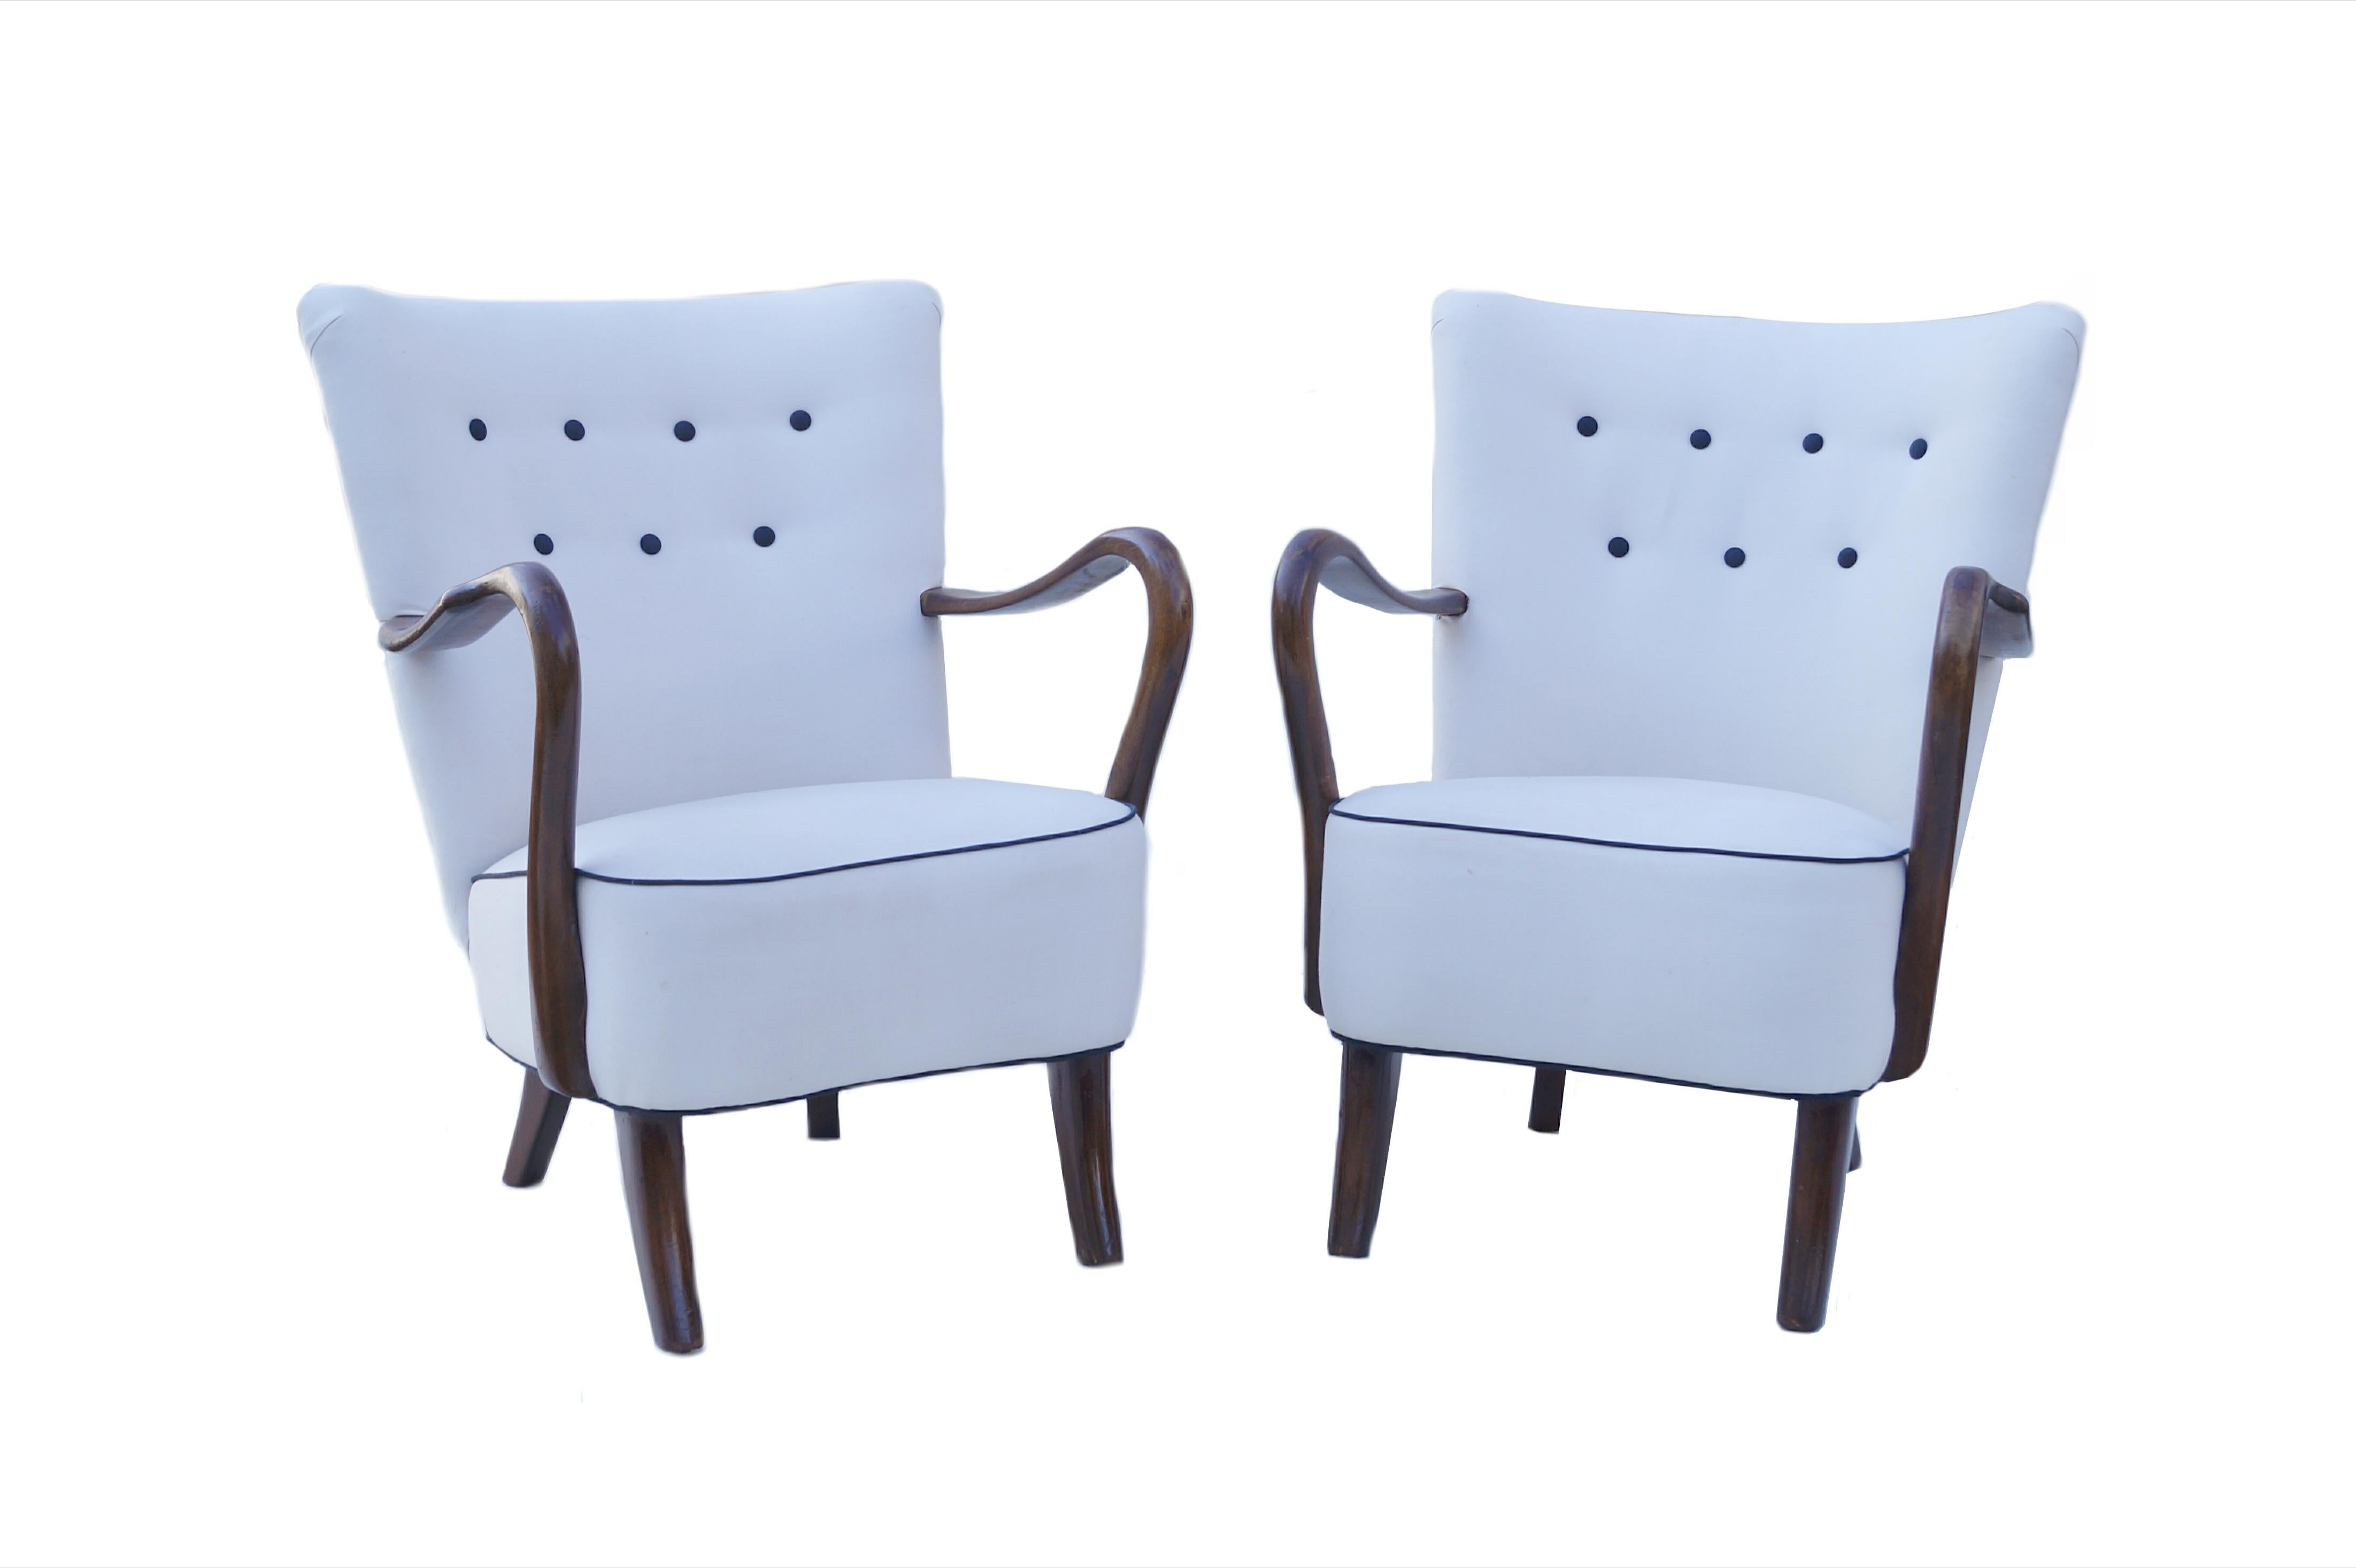 Pair of Alfred Christensen Danish 1940's Easy Lounge Chairs Sculptural Armrests 

If you are in the New Jersey, New York City Metro Area, please contact us with your delivery zipcode, as we may be able to deliver curbside for less than the